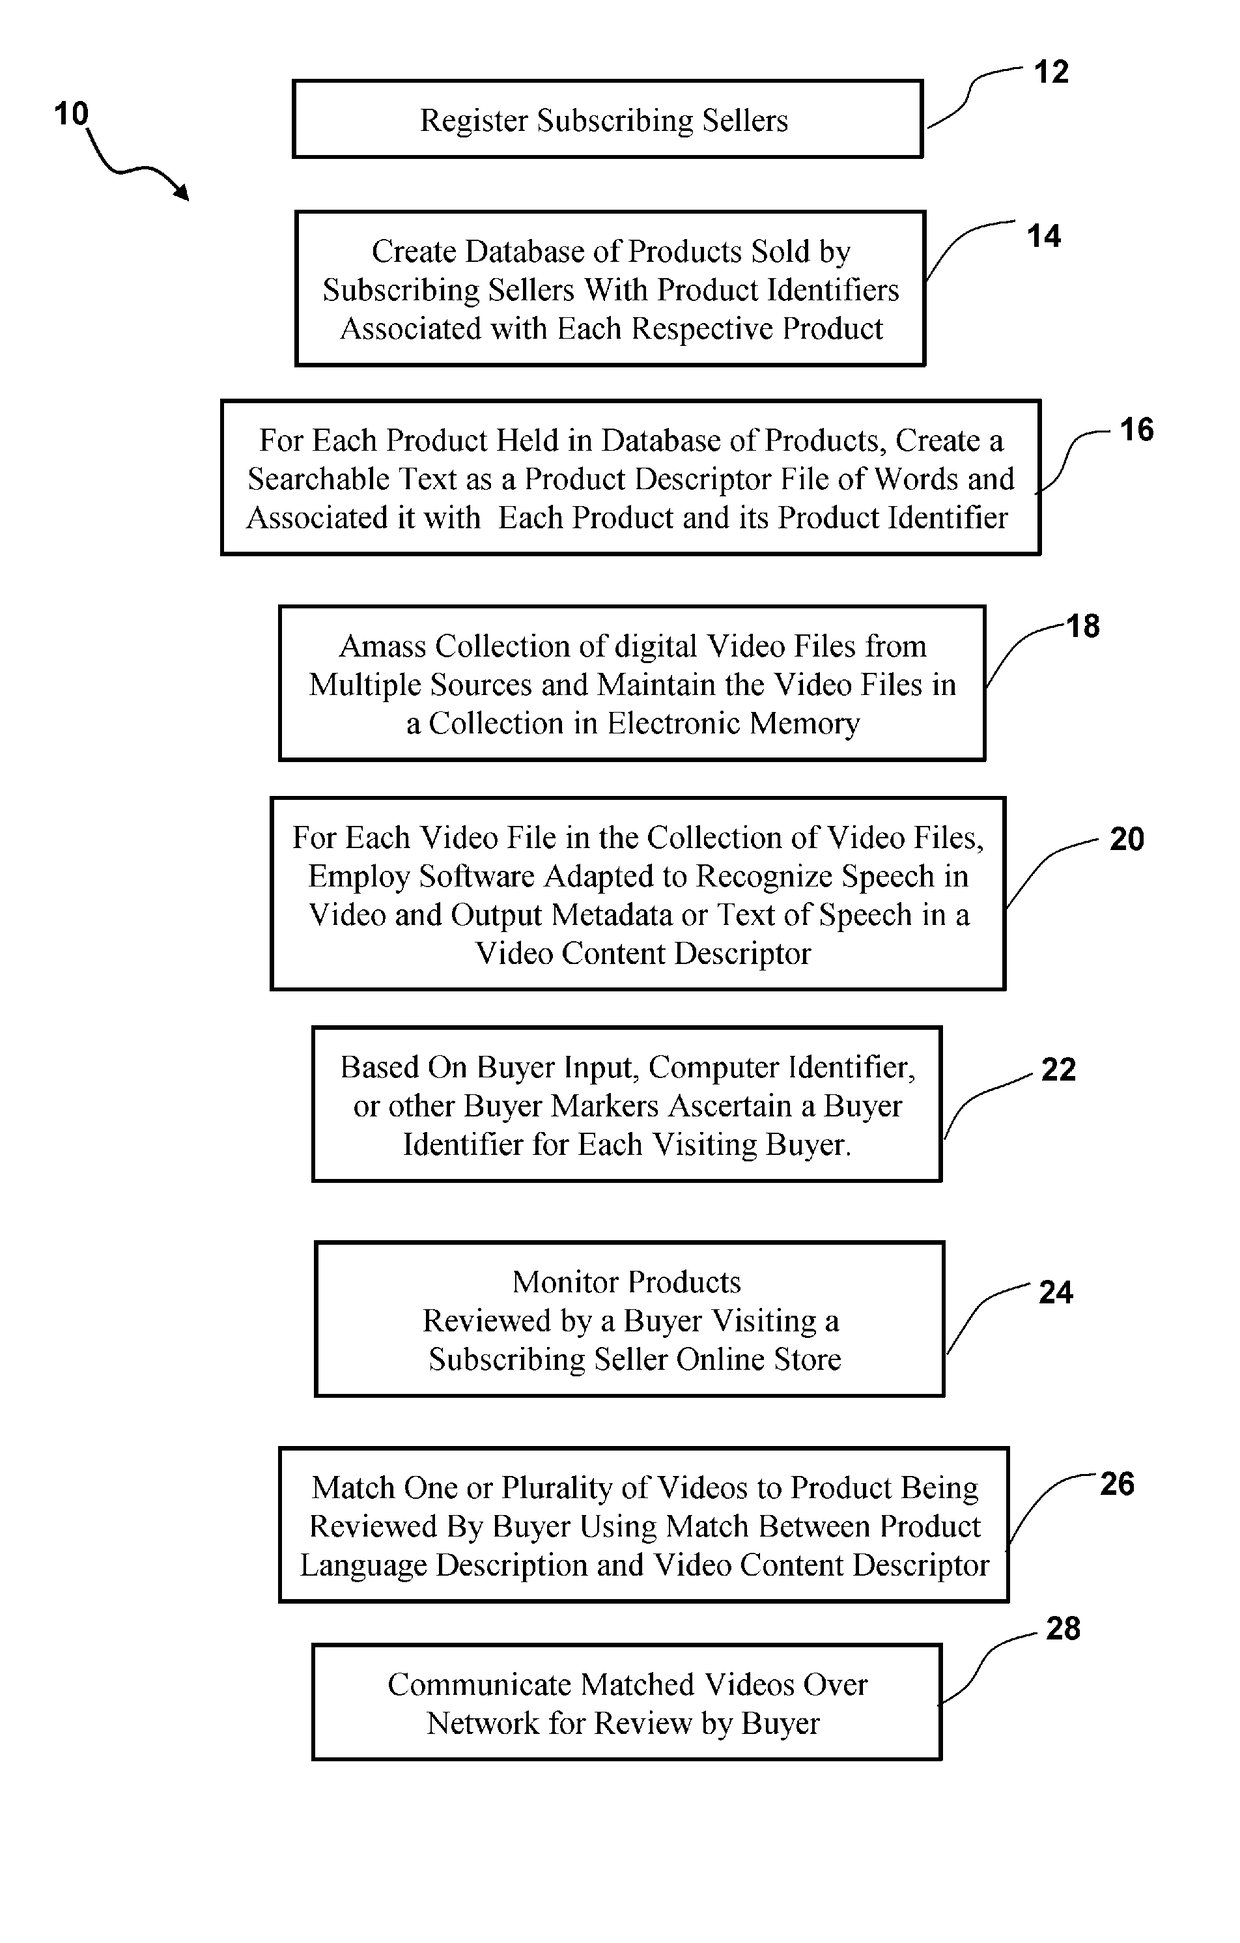 Method for providing electronic video files related to products of interest